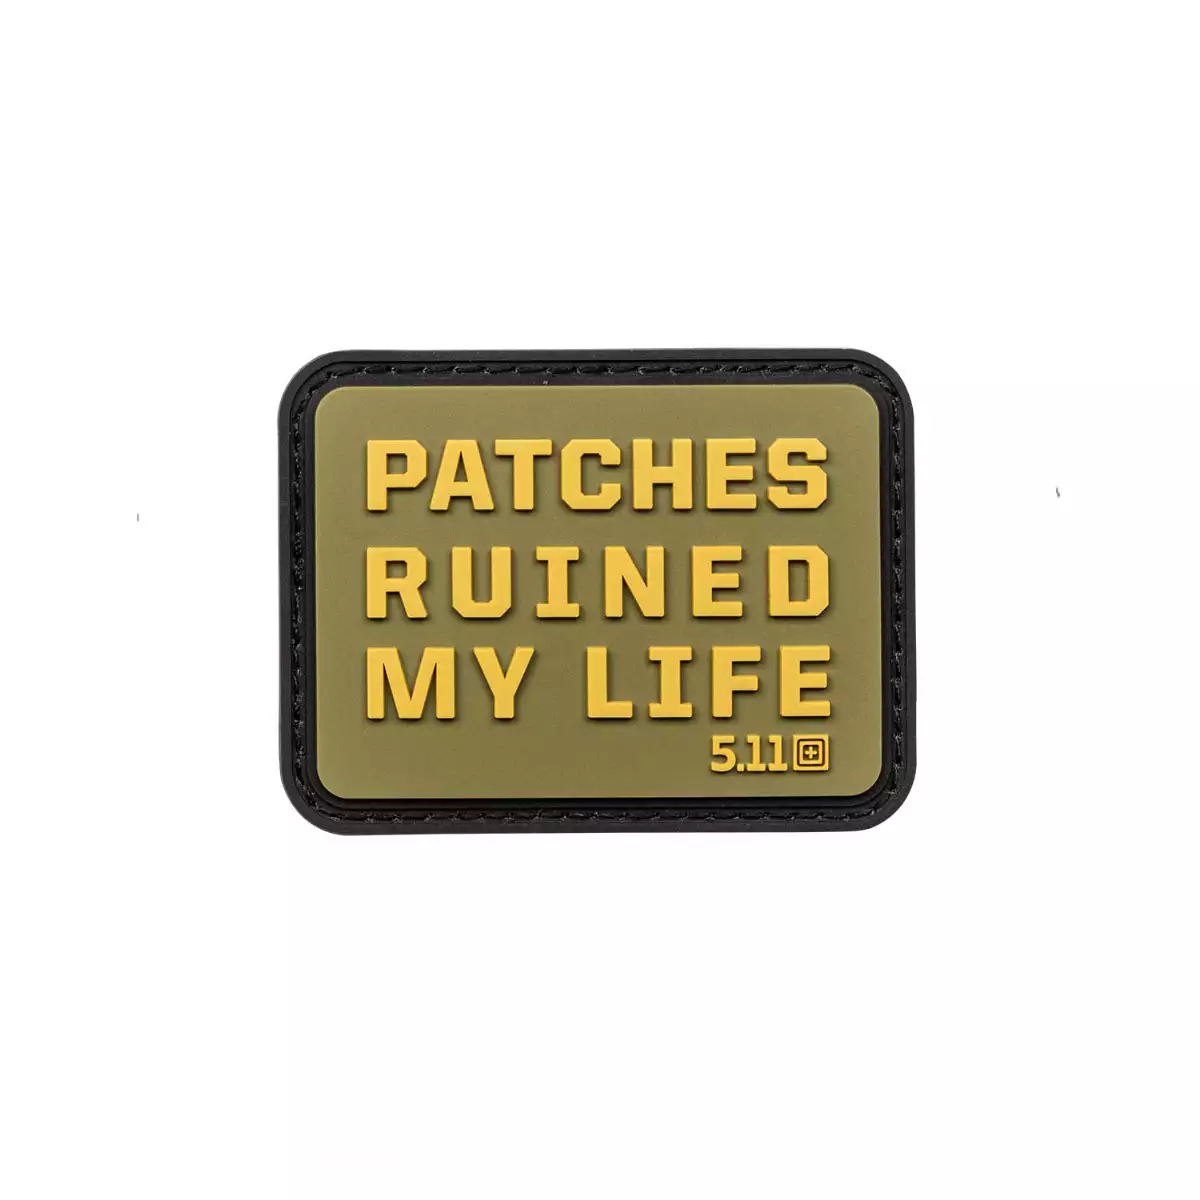 Patch Ruined My Life 5.11